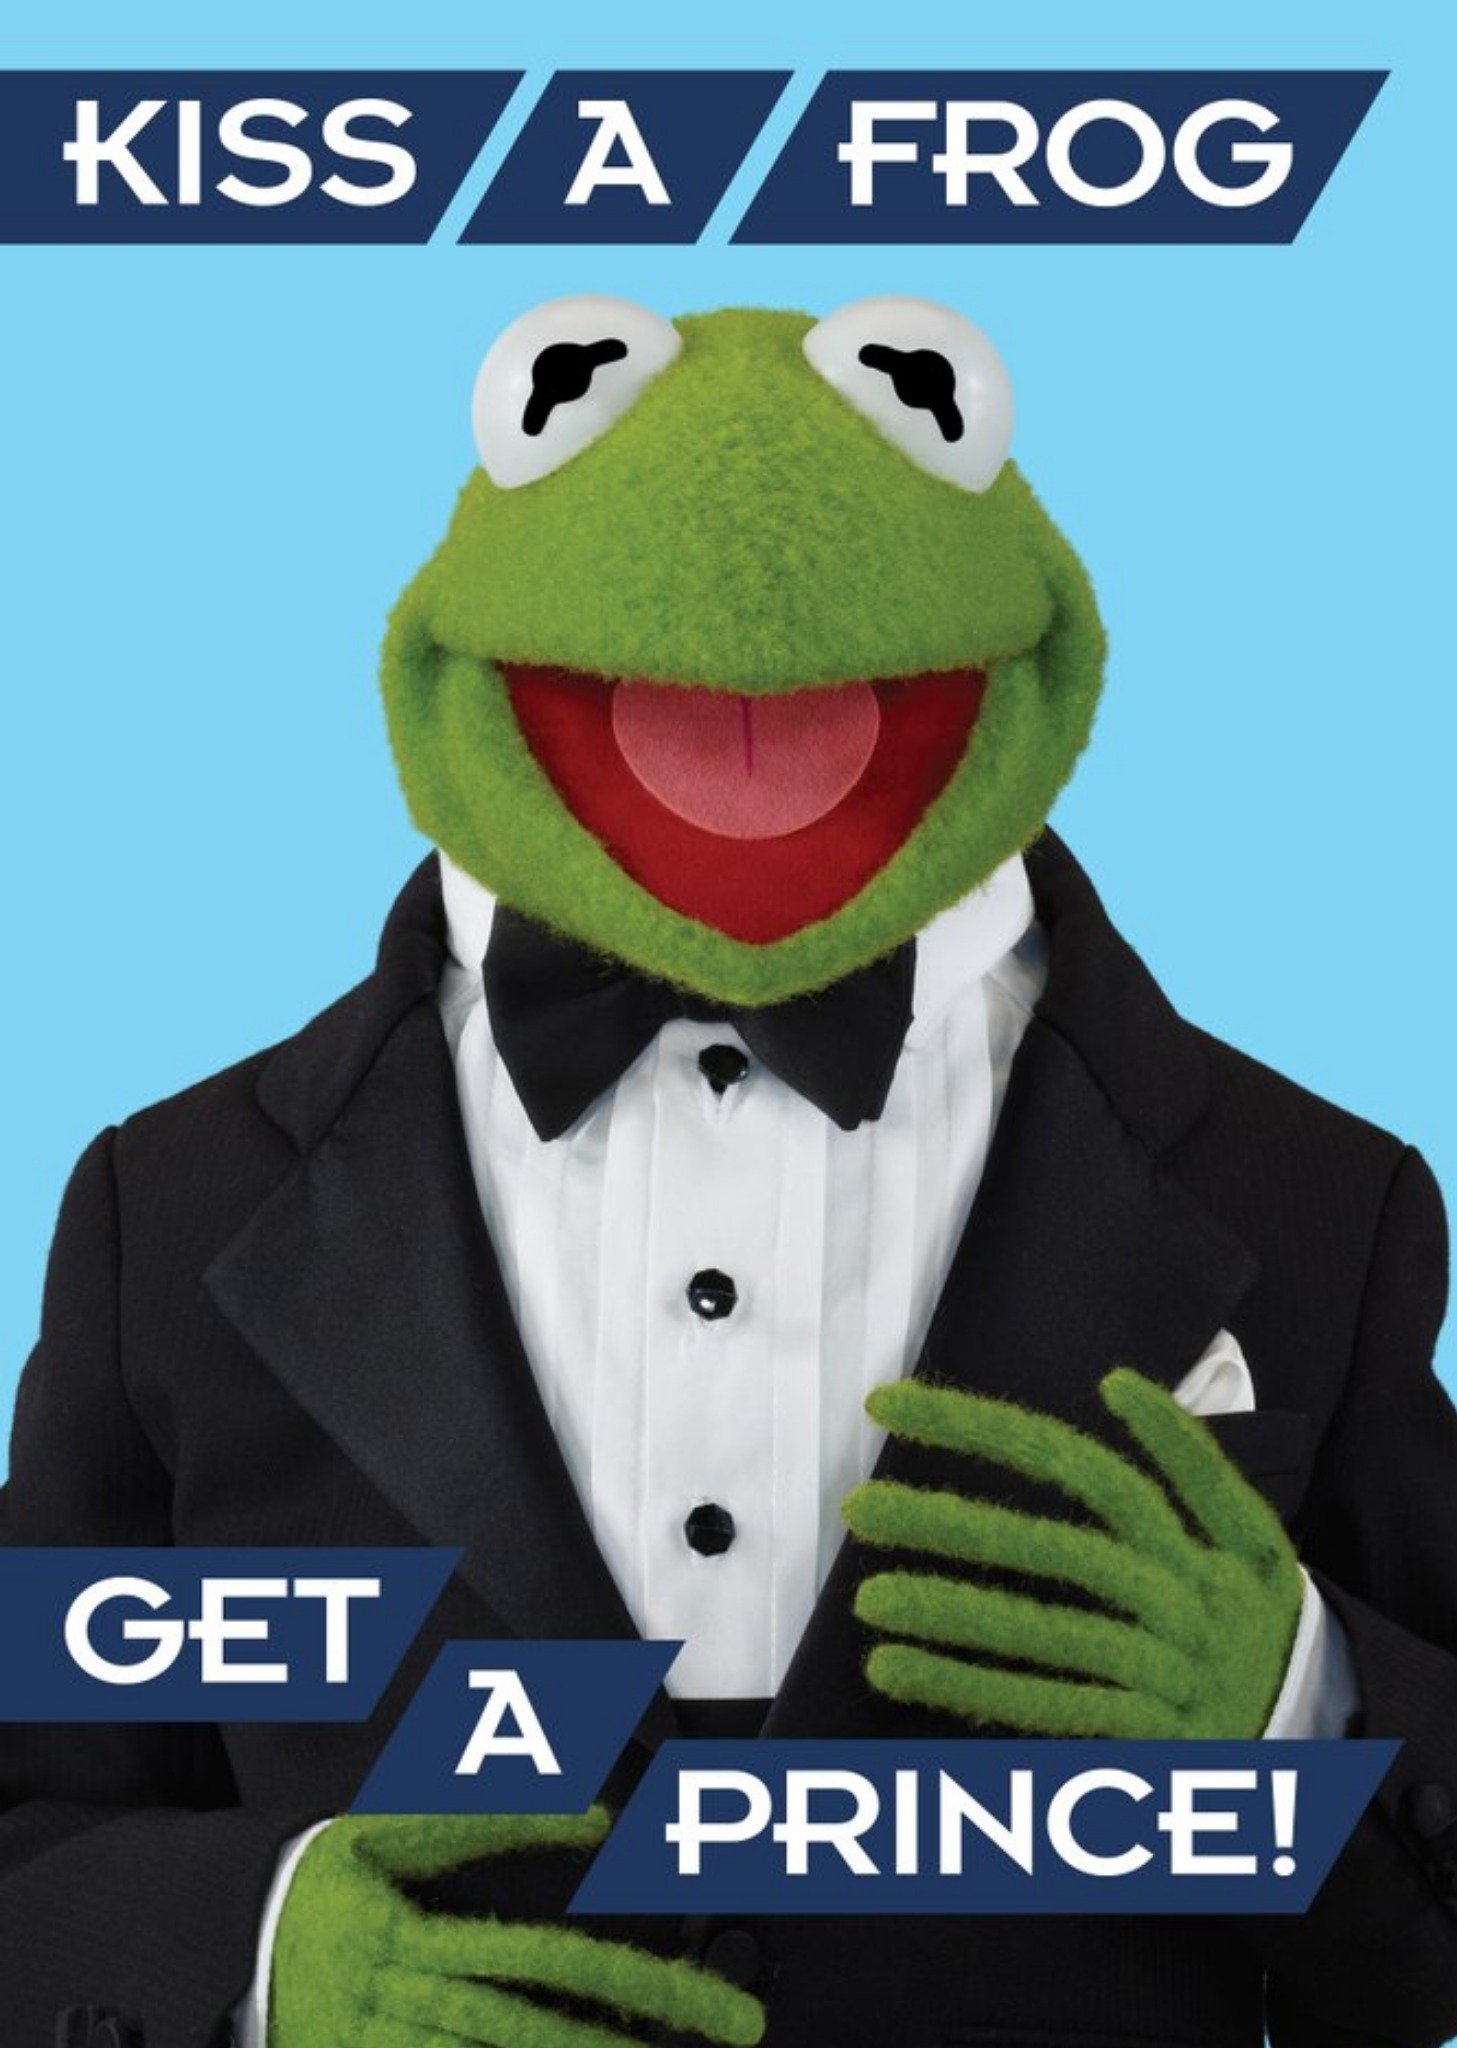 Disney The Muppets Kermit Kiss A Frog, Get A Prince Card, Large